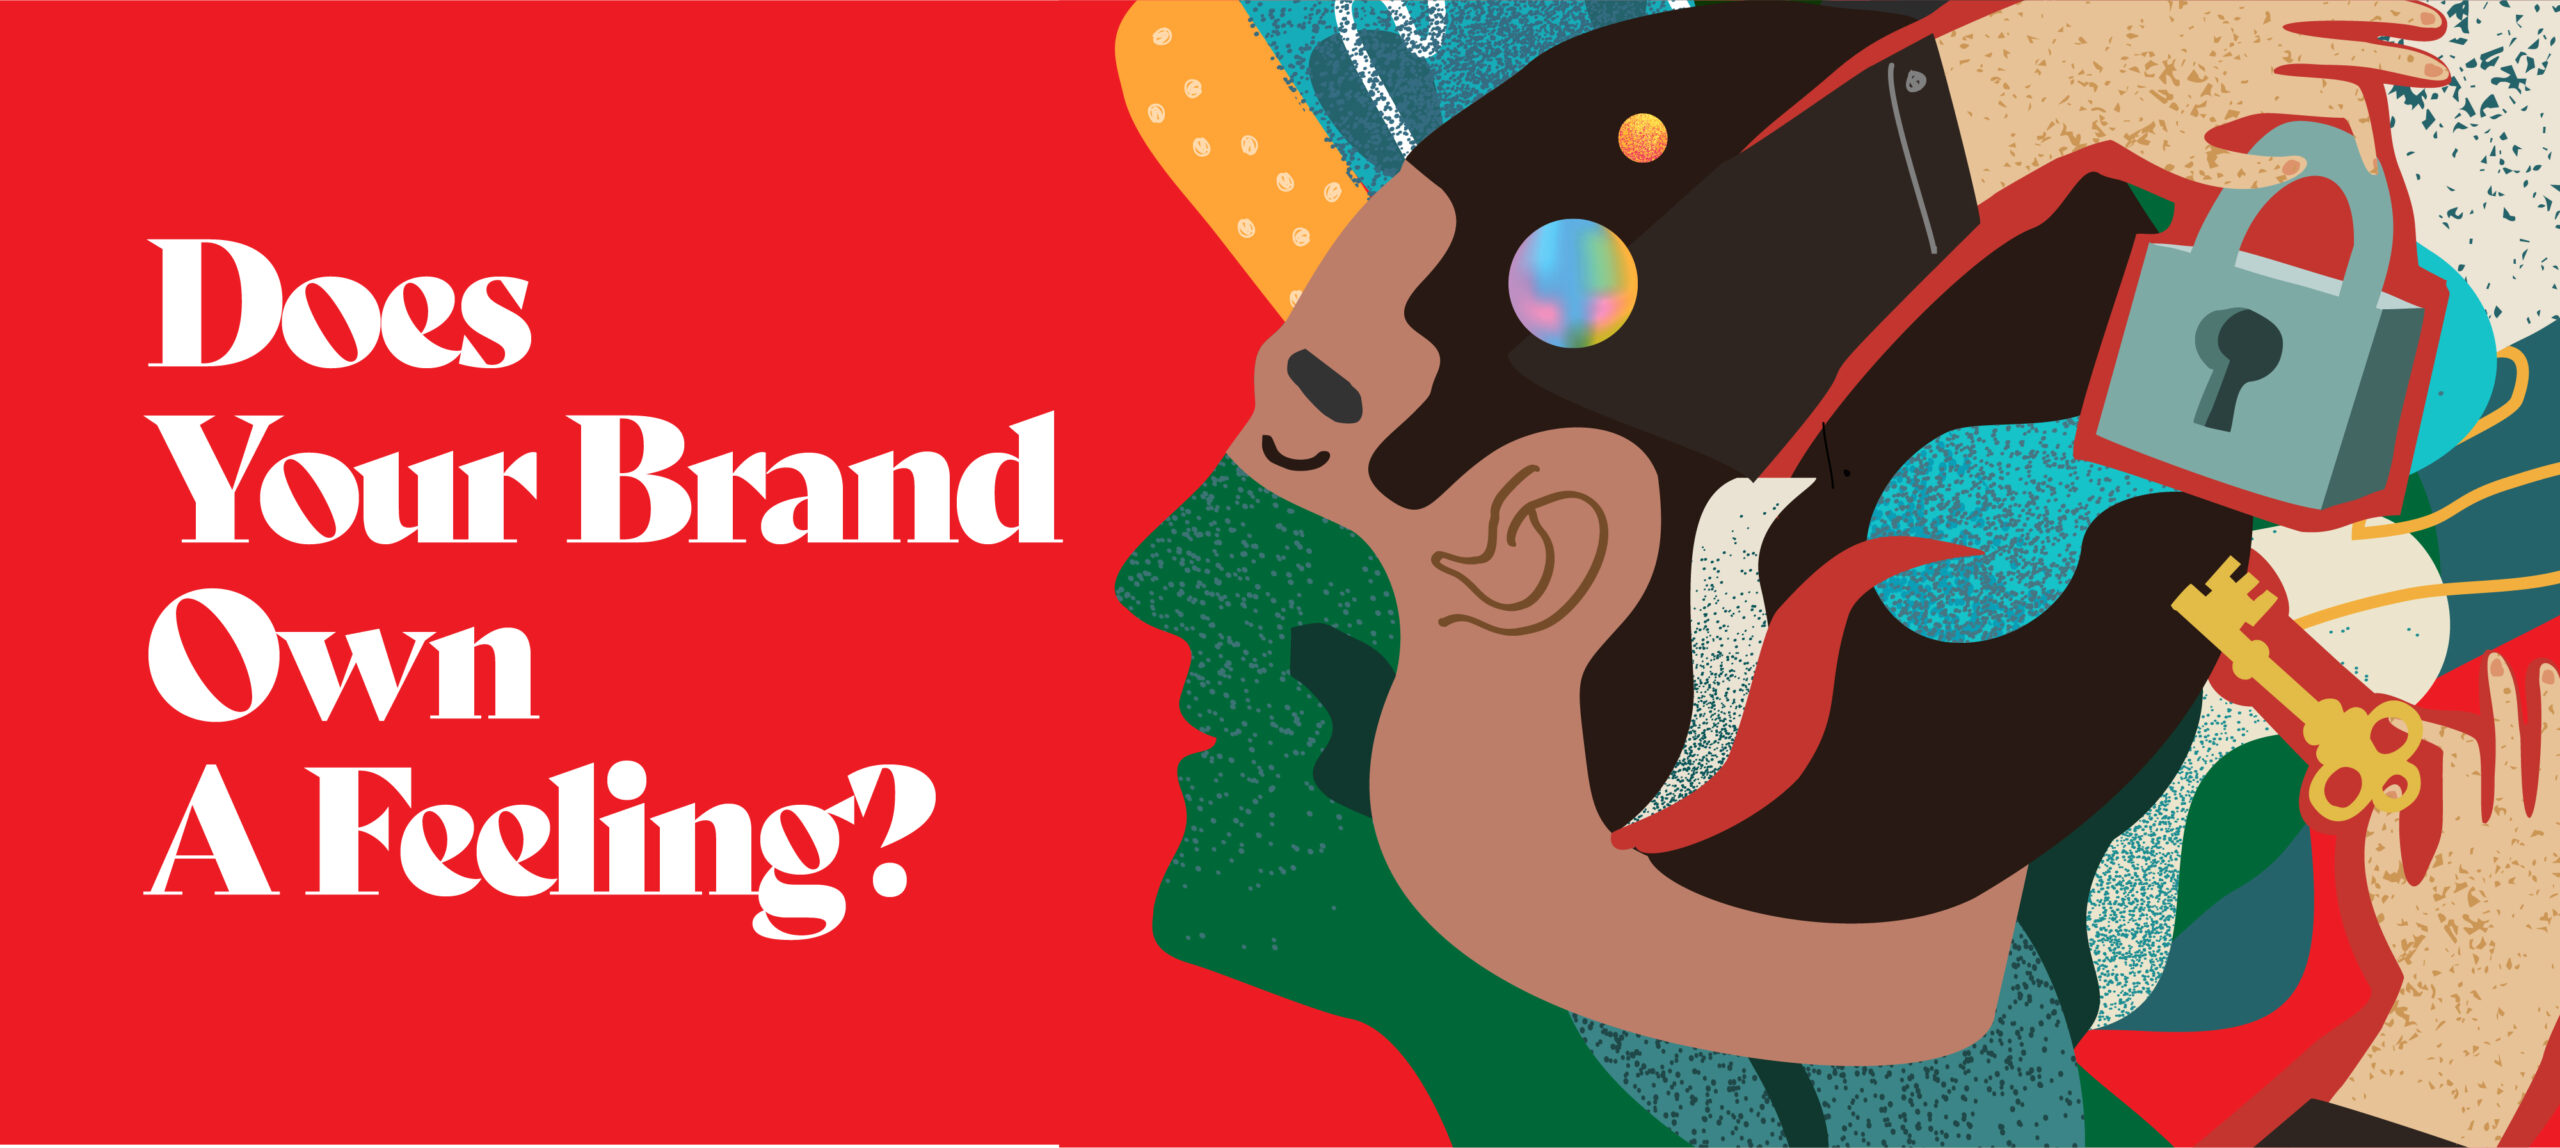 Does your brand own a feeling? by Navonil Chatterjee